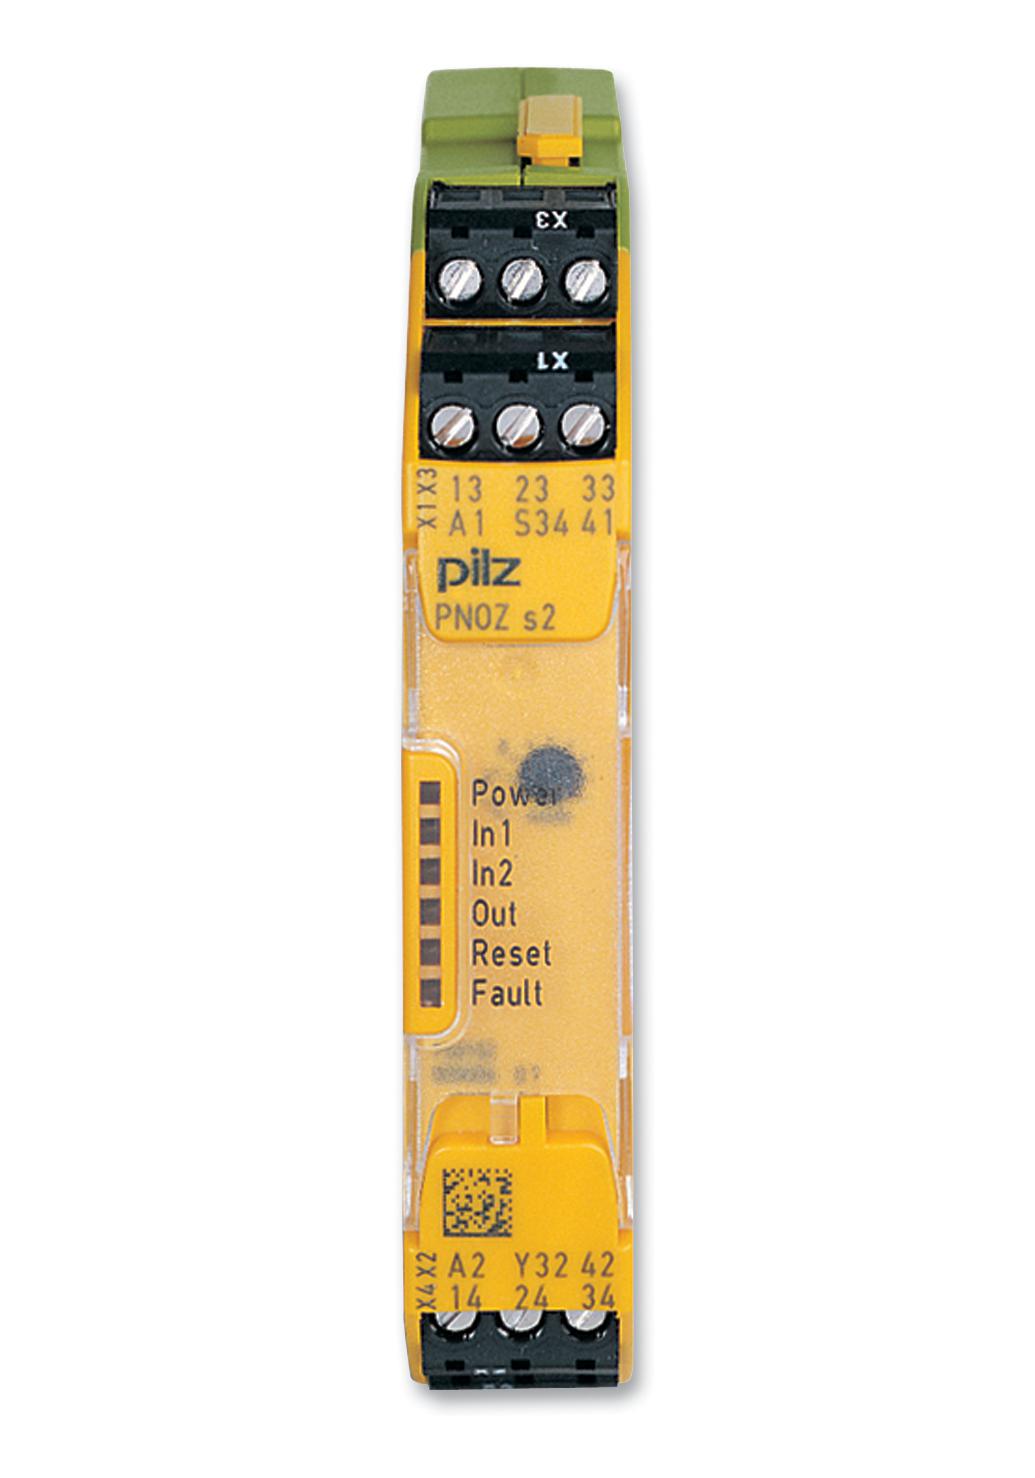 751102 RELAY, SAFETY, 3PST-NO, 240VAC, 6A PILZ